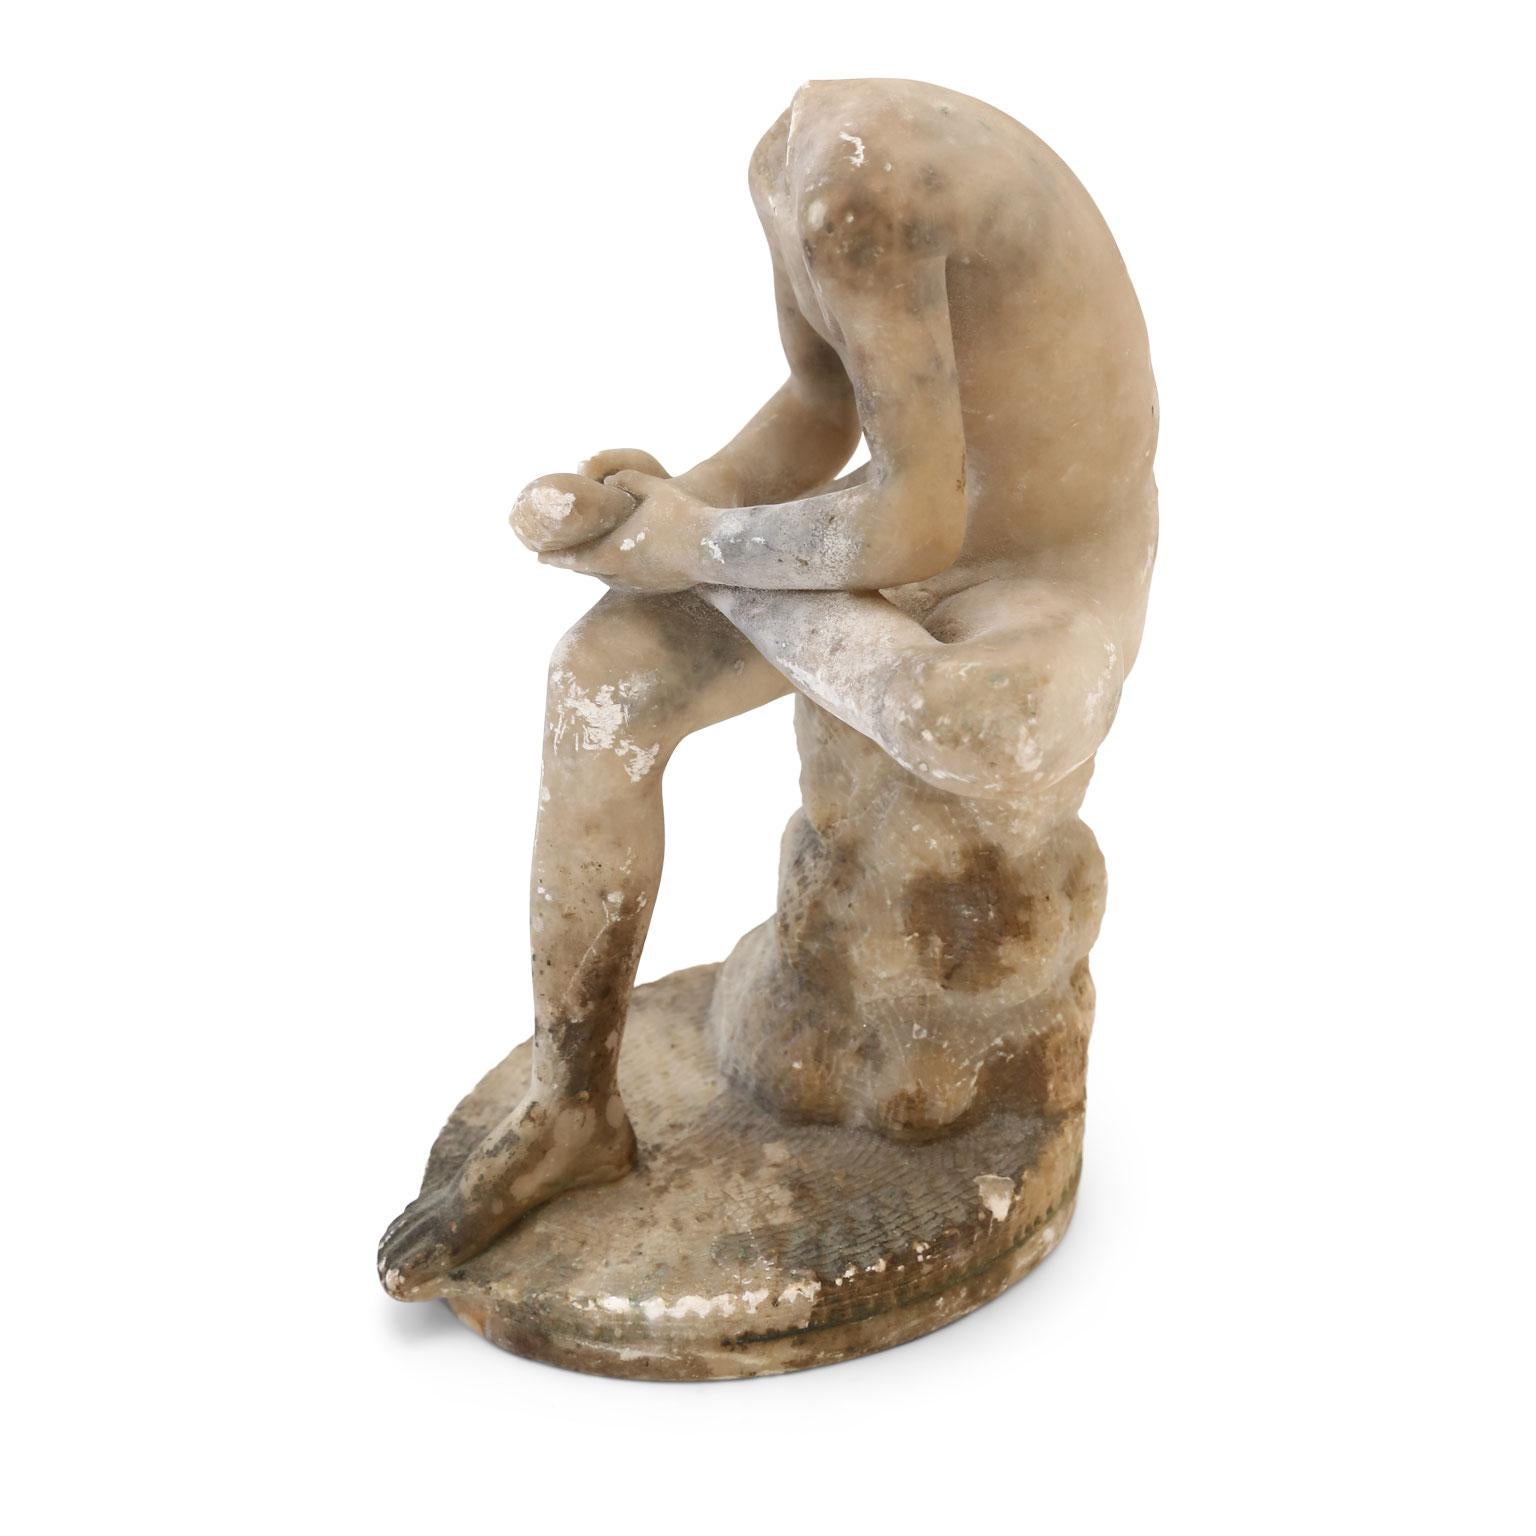 Italian alabaster sculpture of boy pulling thorn from his foot. Dated to the late 19th century and modeled after Spinario. Missing head and other losses.